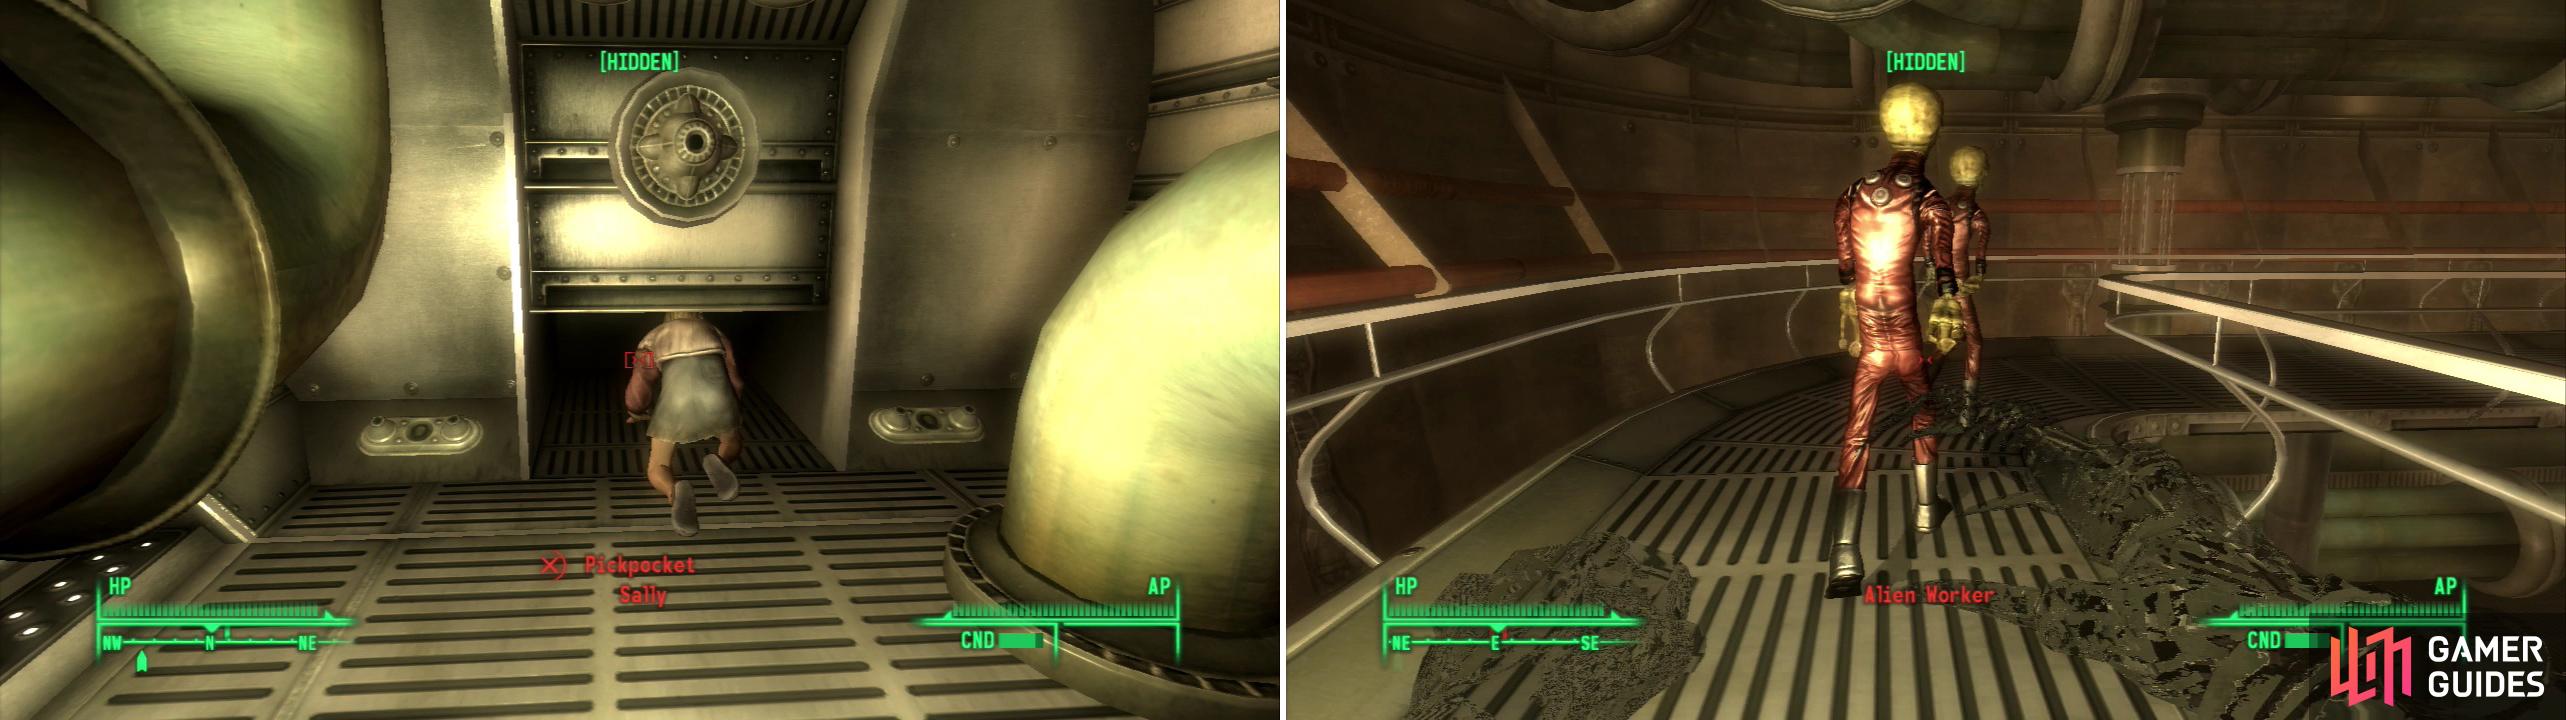 Sally's size allows her to sneak around-which will prove invaluable, since it allows you access to parts of the ship you wouldn't otherwise be able to reach (left). Worker aliens don't pose a threat to you (right), but they're still narks, so you might as well kill them… even if it will cost you some karma.